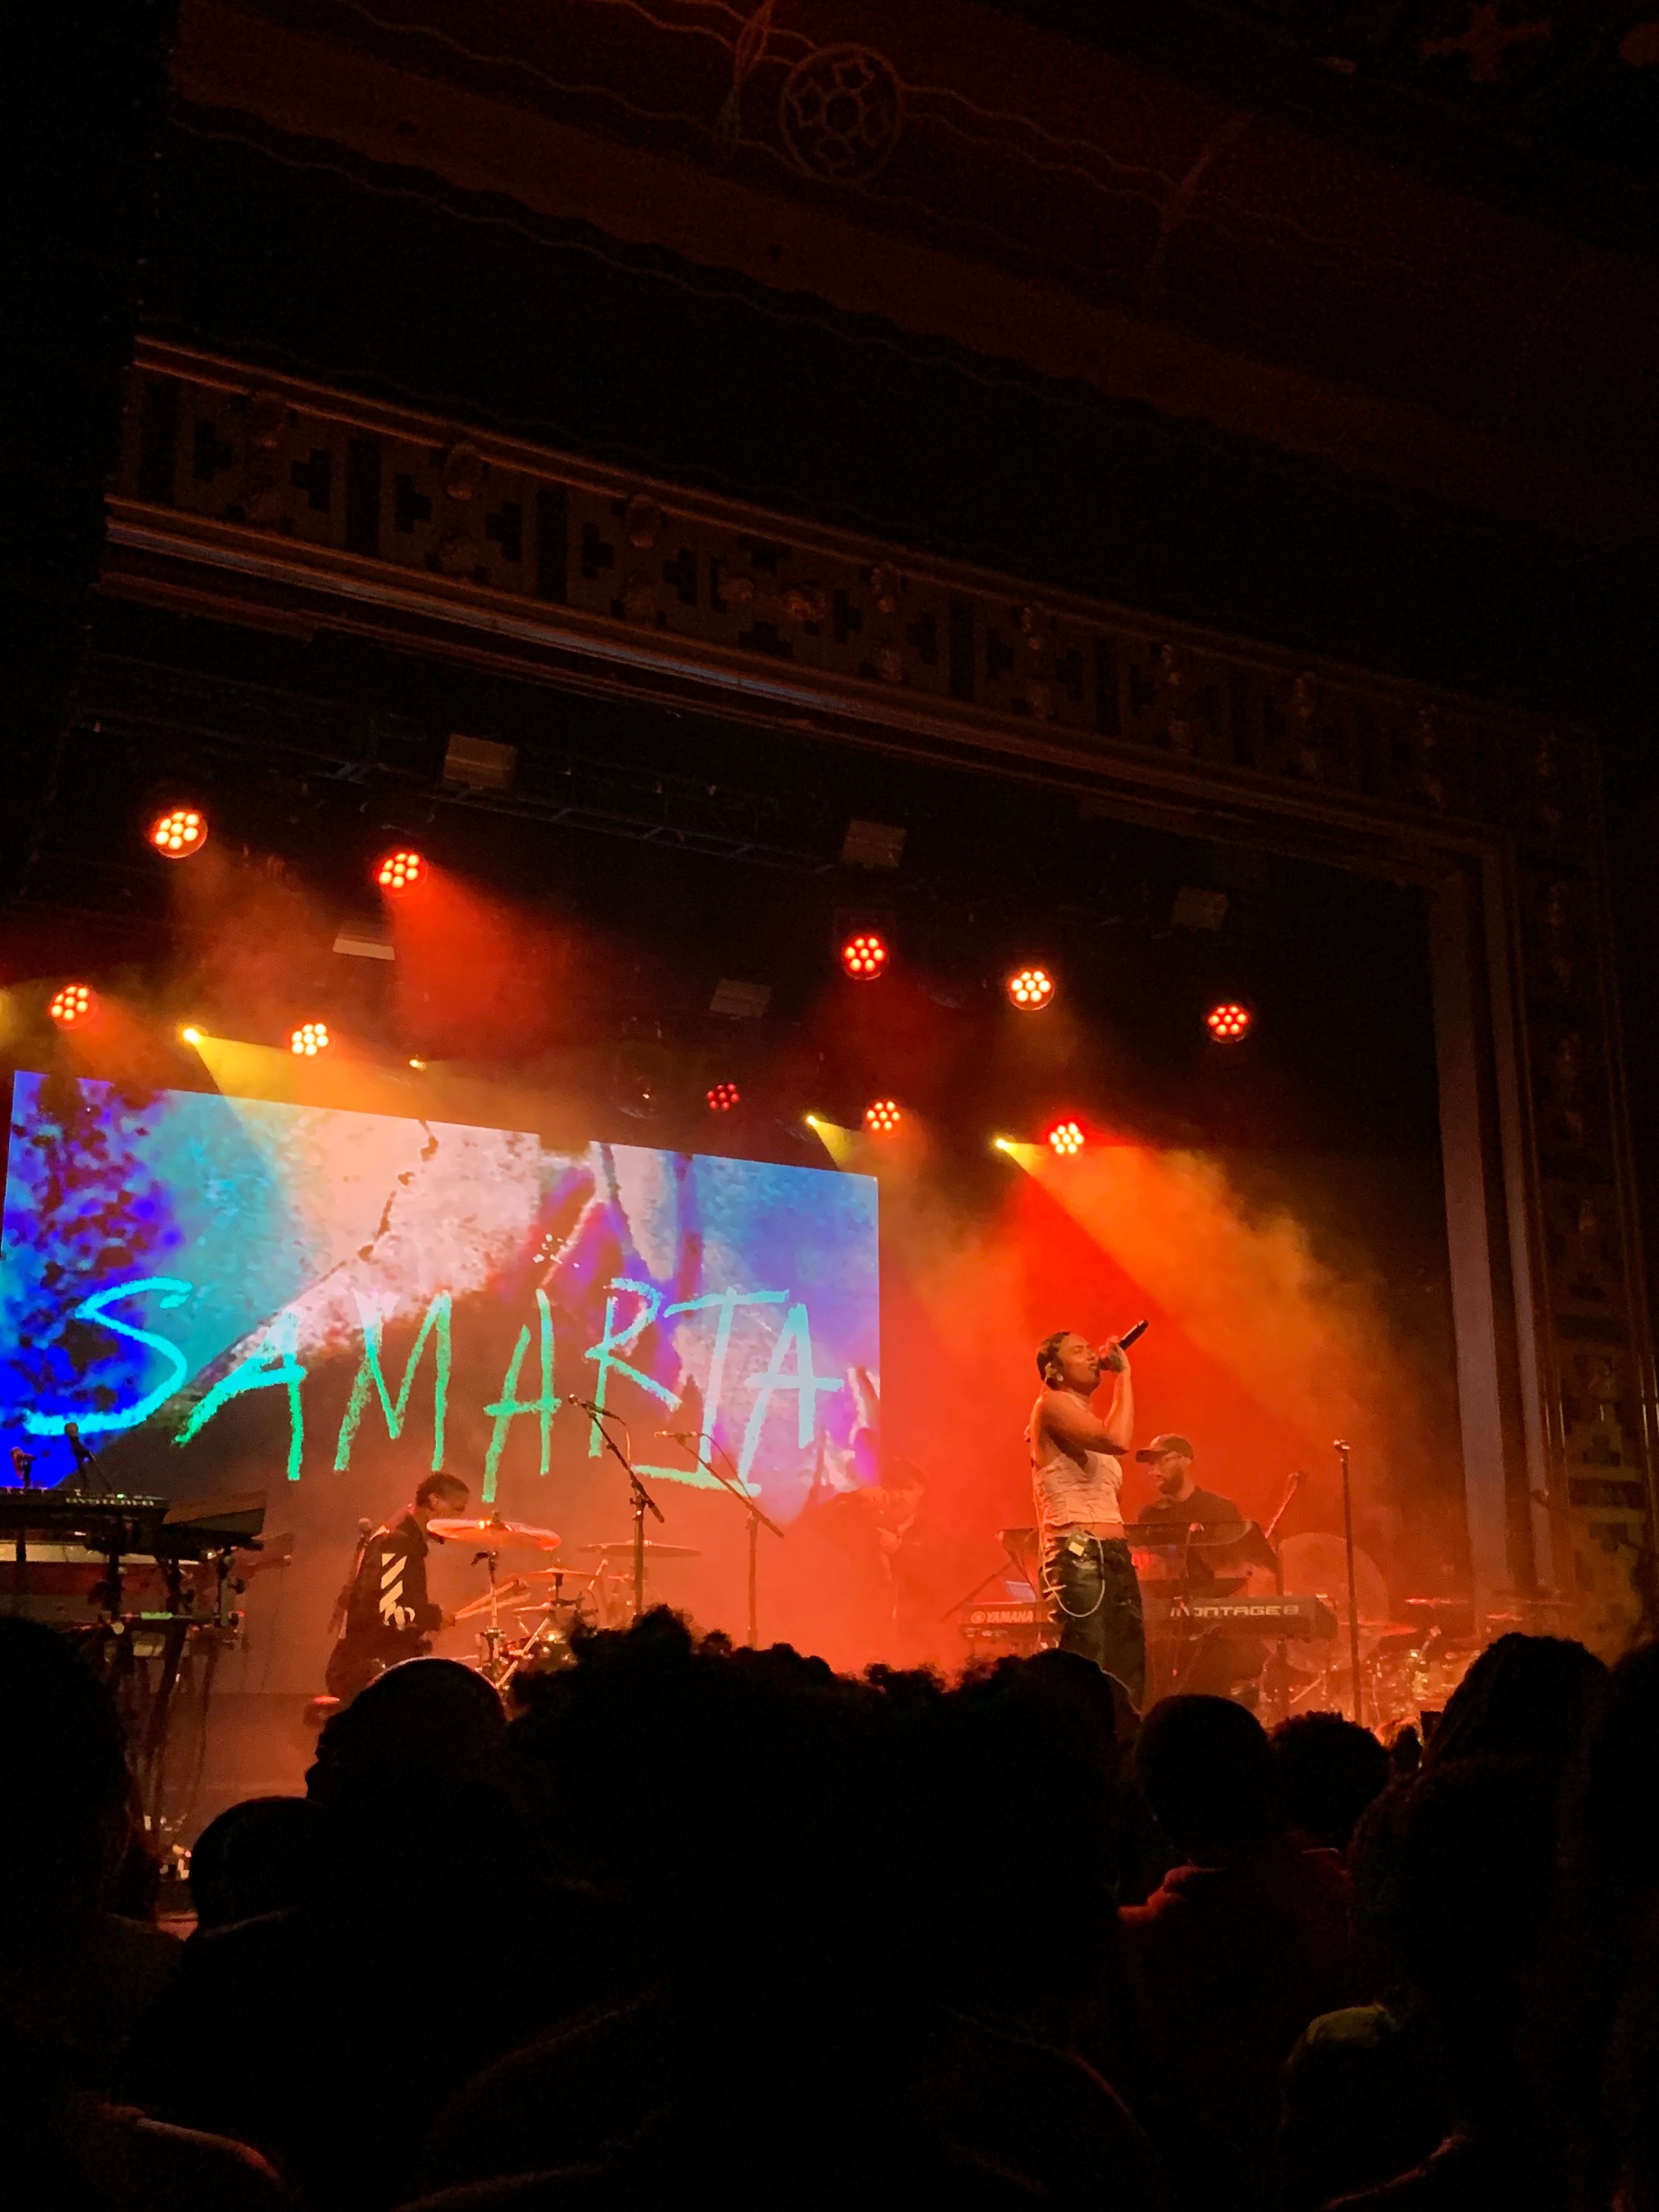 Oakland R&B singer, Samaria performing on stage at Webster Hall as the opening act for FLO (Jorja, Renee and Stella) for their sold out "FLO Live" tour.